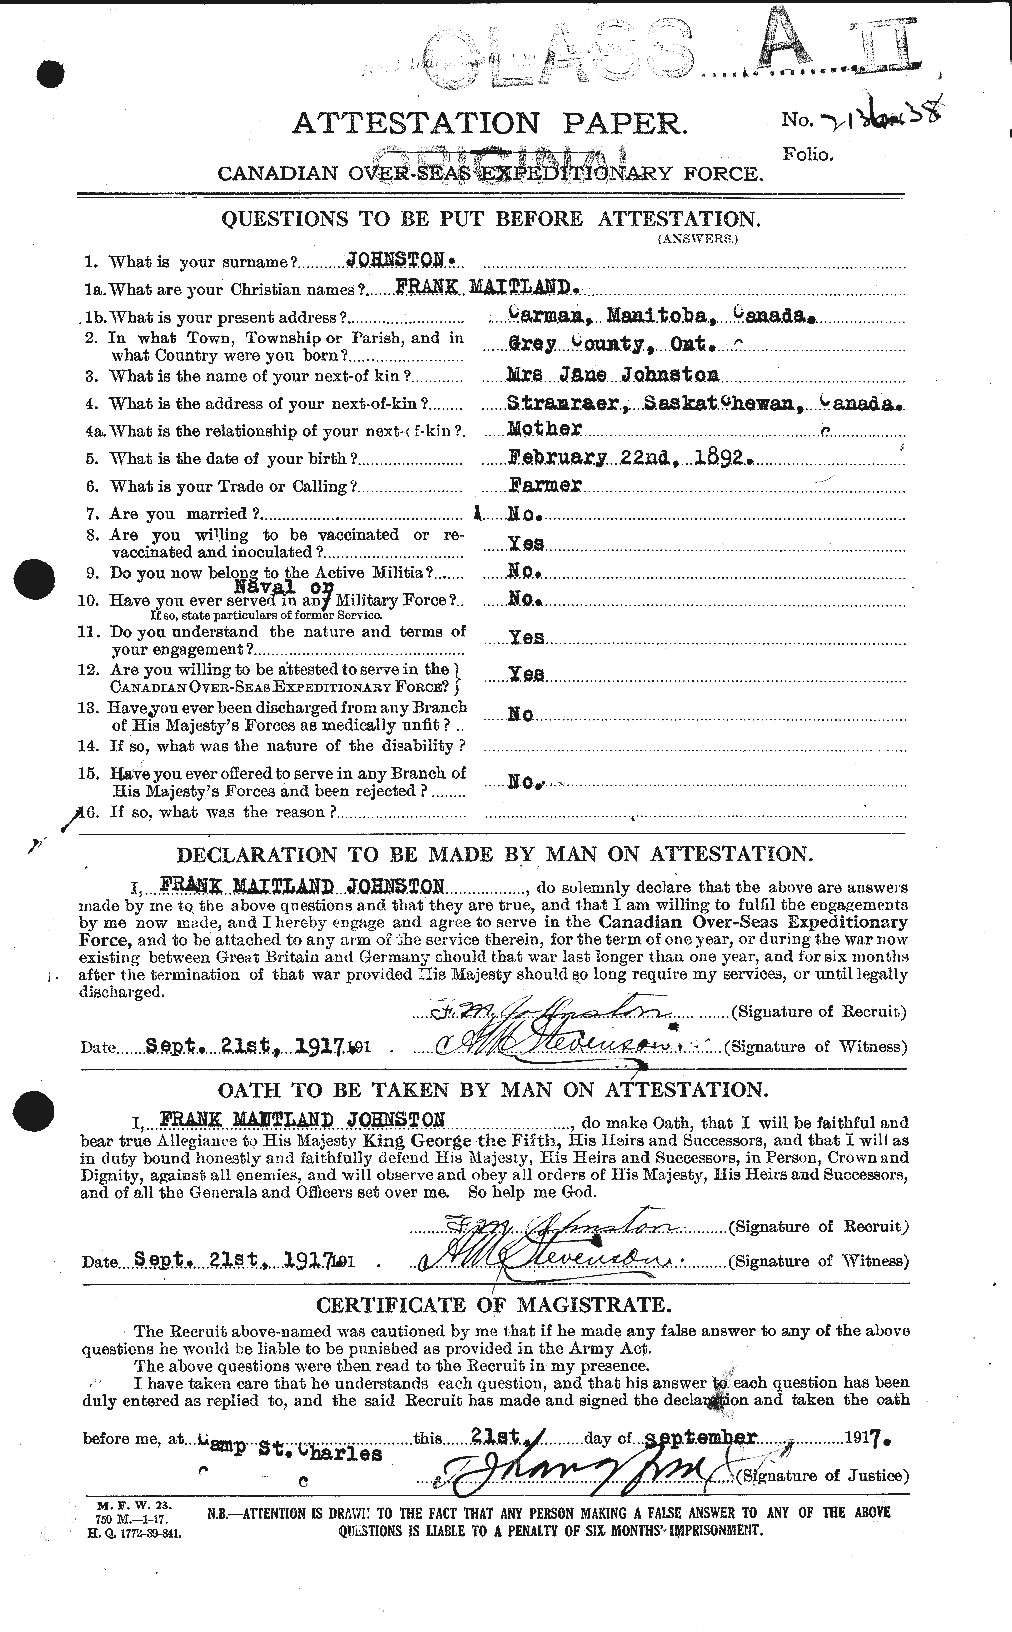 Personnel Records of the First World War - CEF 423280a